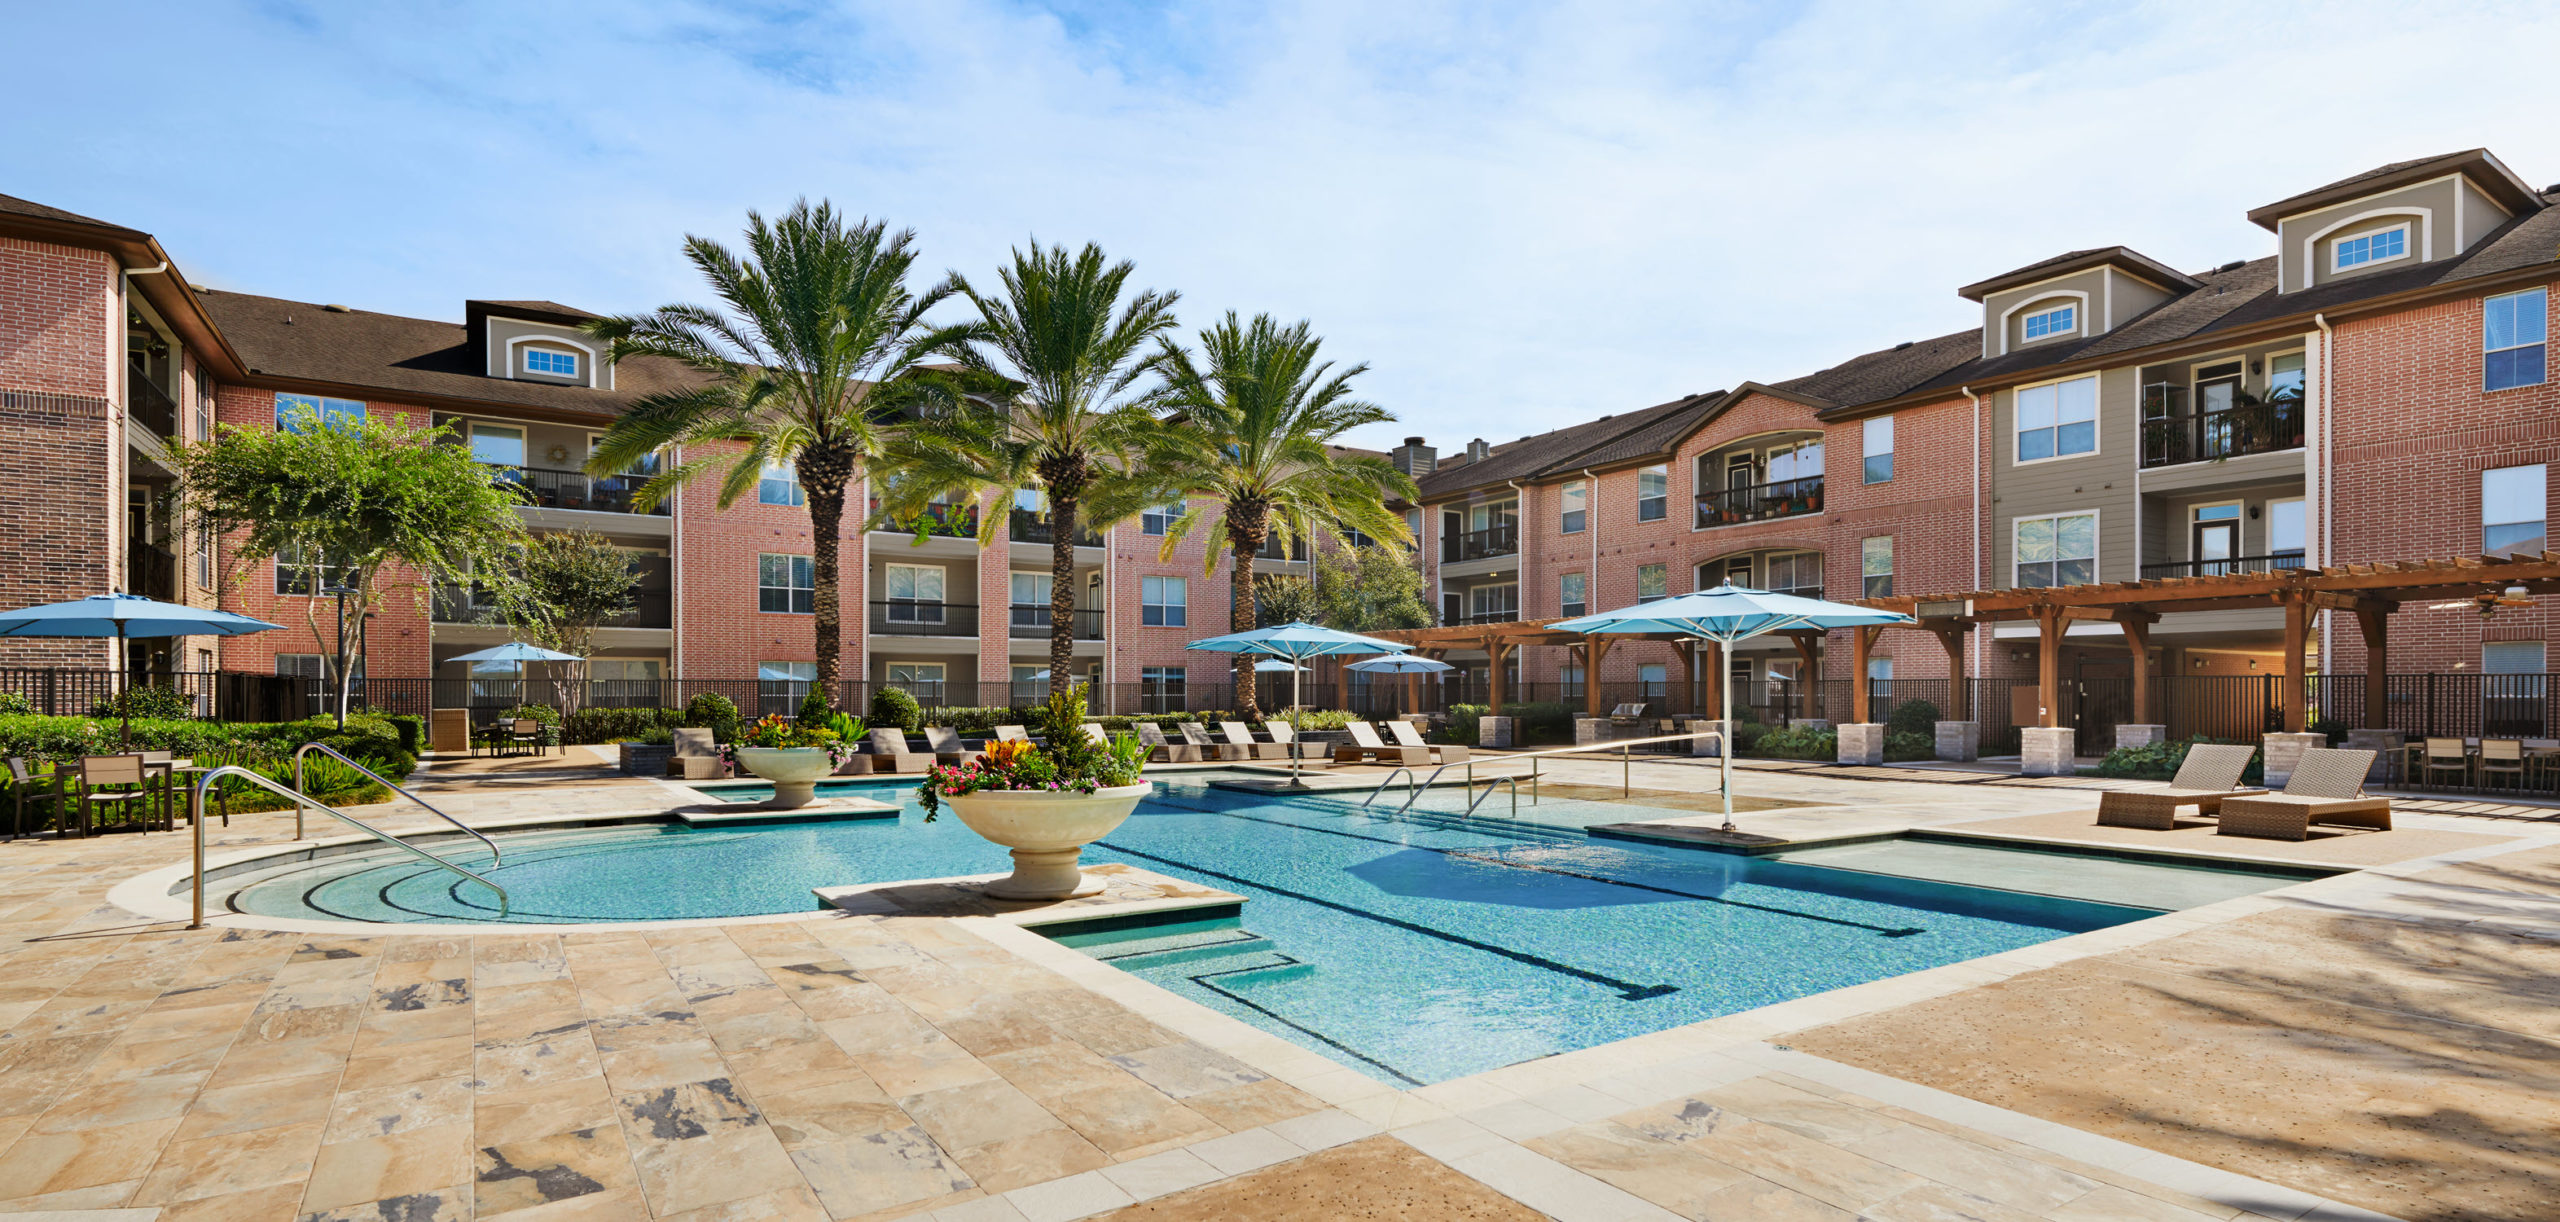 Pool with Cabanas and Outdoor Dining at Camden Royal Oaks Apartments in Houston Texas